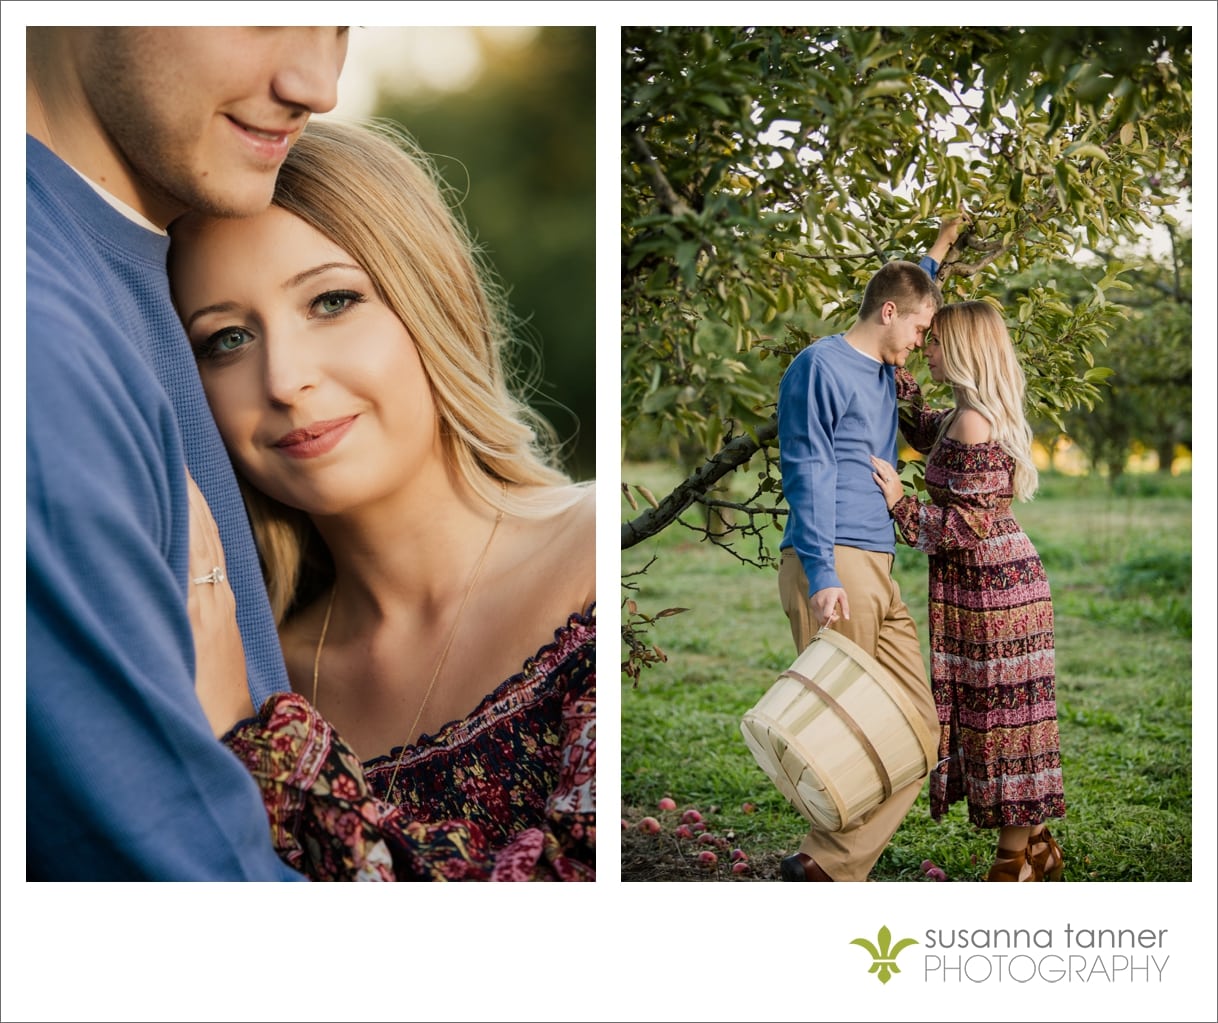 Vintage Chic Orchard Engagement Photography, stealing a moment under the apple tree